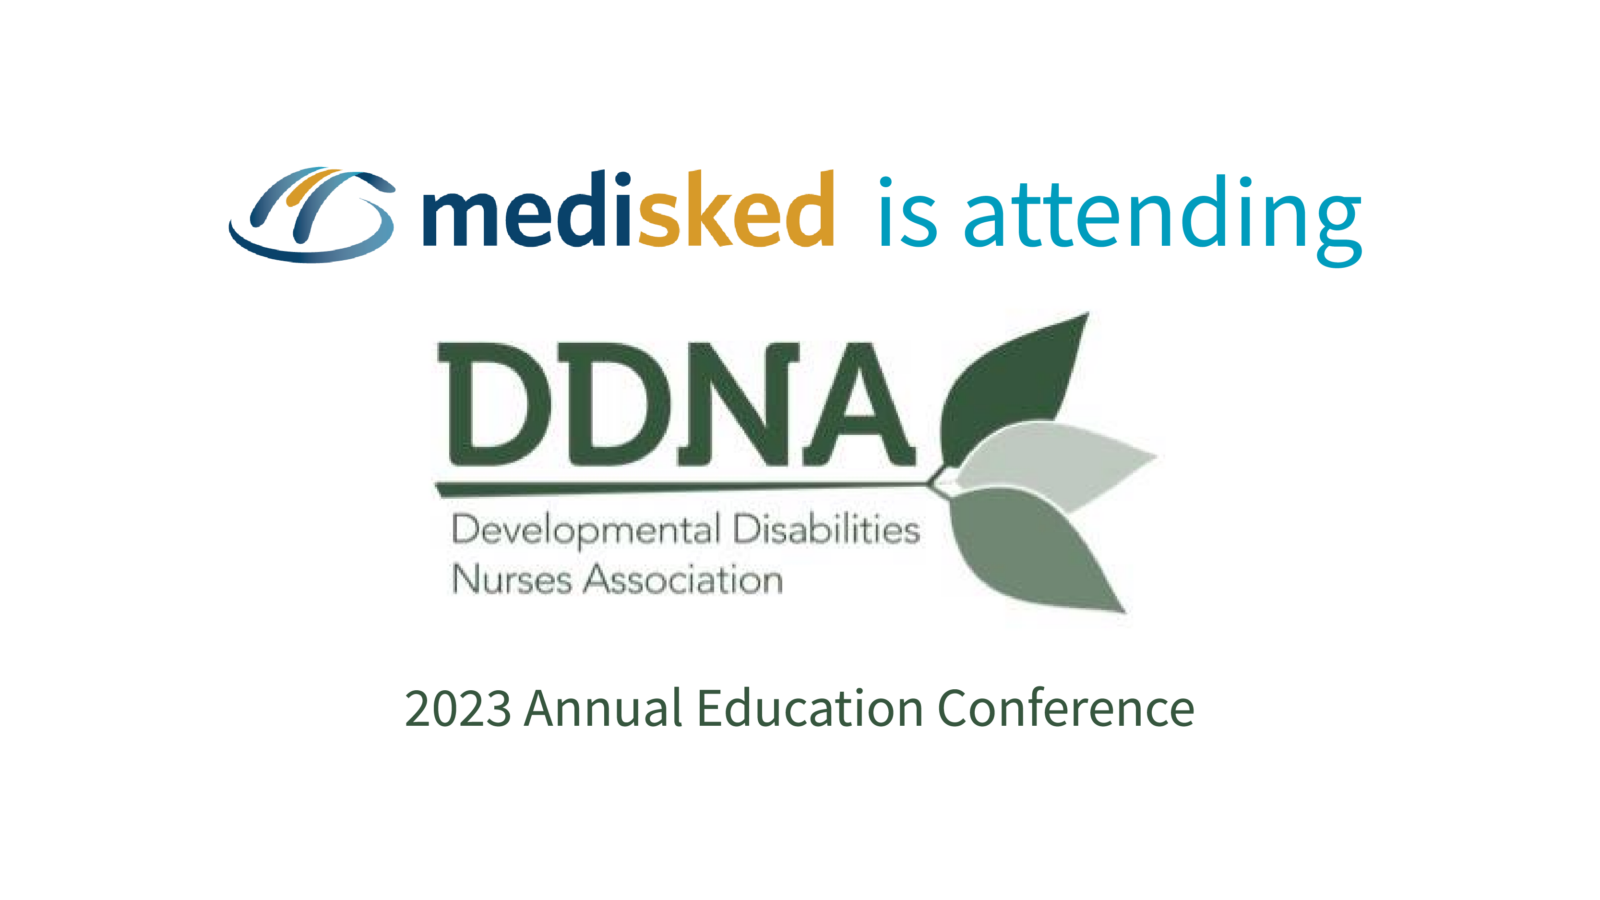 DDNA Annual Education Conference 2023 MediSked, a CaseWorthy Company